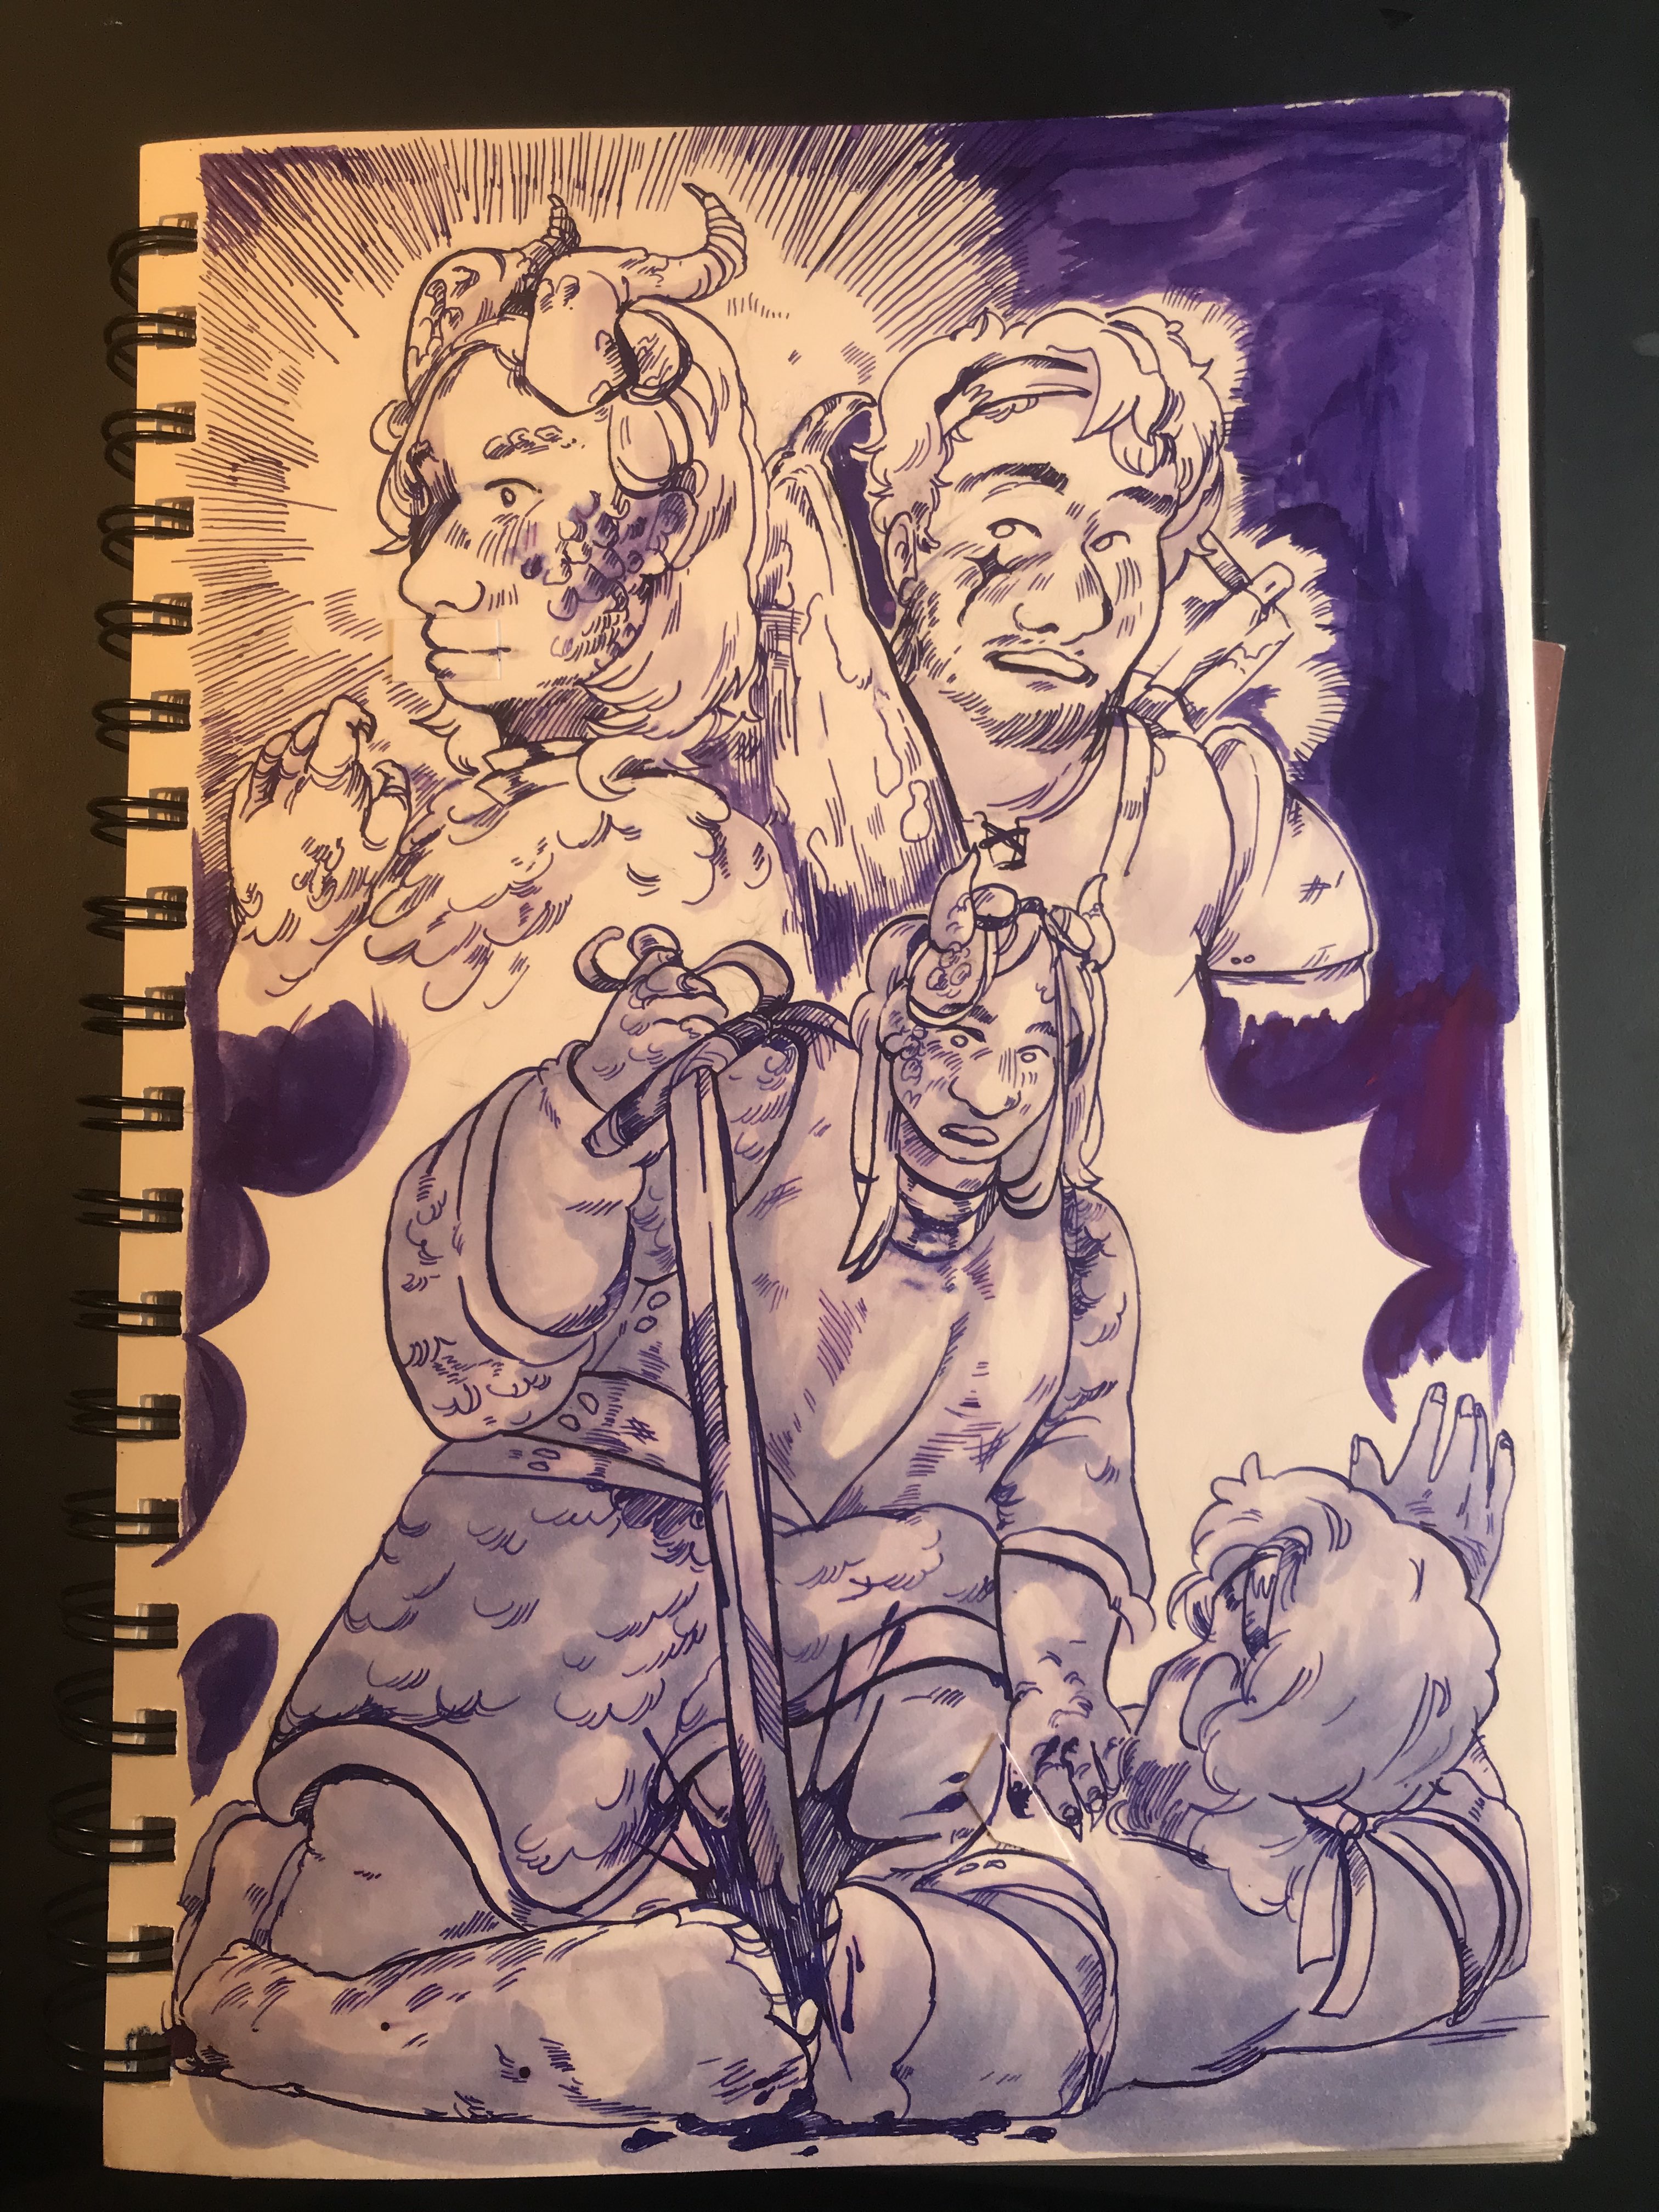 Purple pen and ink drawings on a sketchbook. The first one is crosshatched and has minimal marker shading, and depicts a woman with dragon features and a man with a headband. The second drawing is shaded more heavily, and depicts the woman sitting over the man and stabbing at his arm.